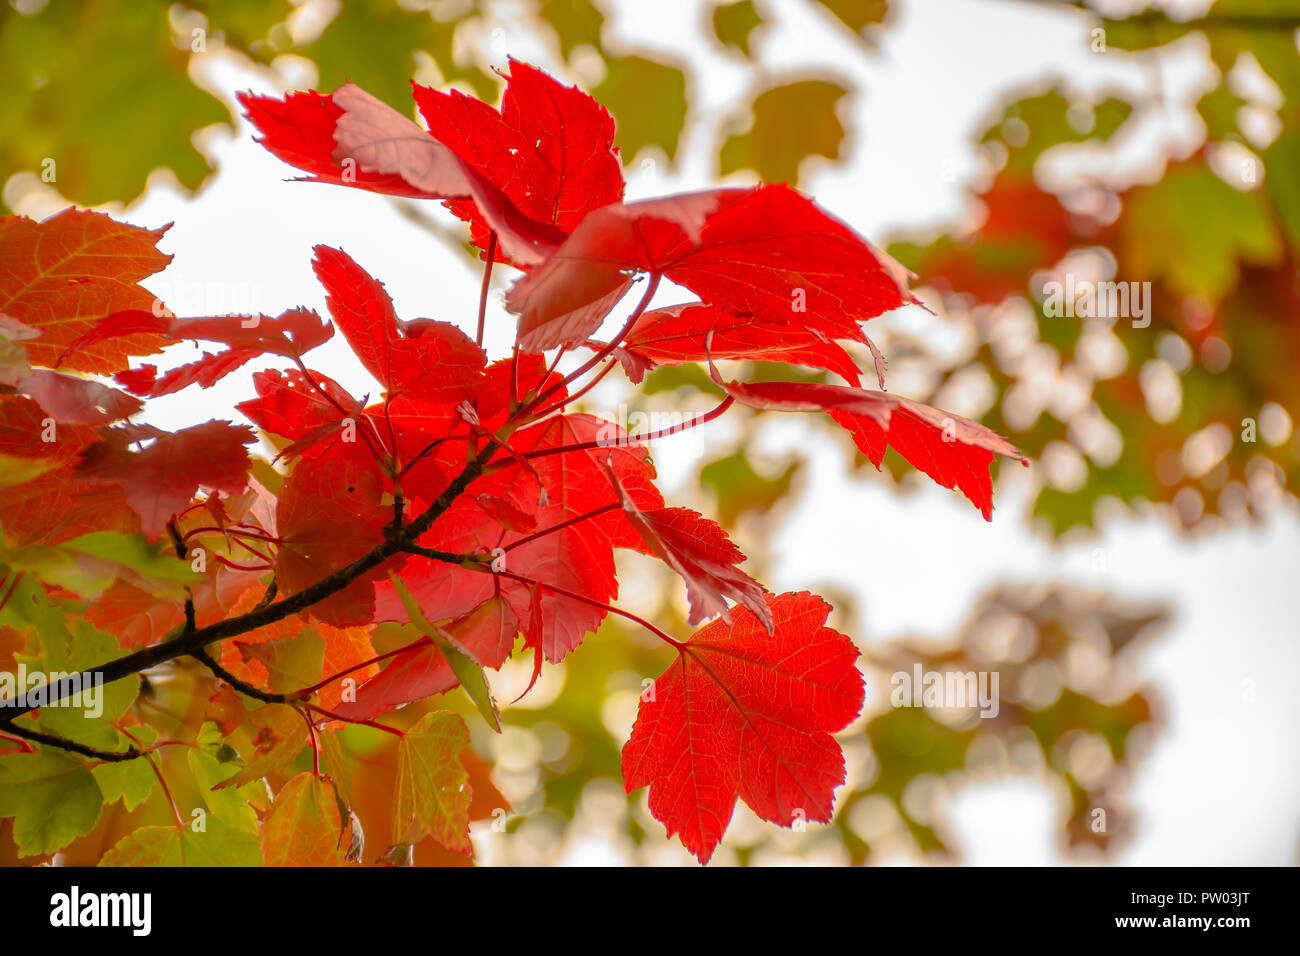 Maple tree branch with red leaves in autumn coloured woodland.Nature photograph Uk.Autumn theme.Backlit bokeh and blurred tree branches in background. Stock Photo